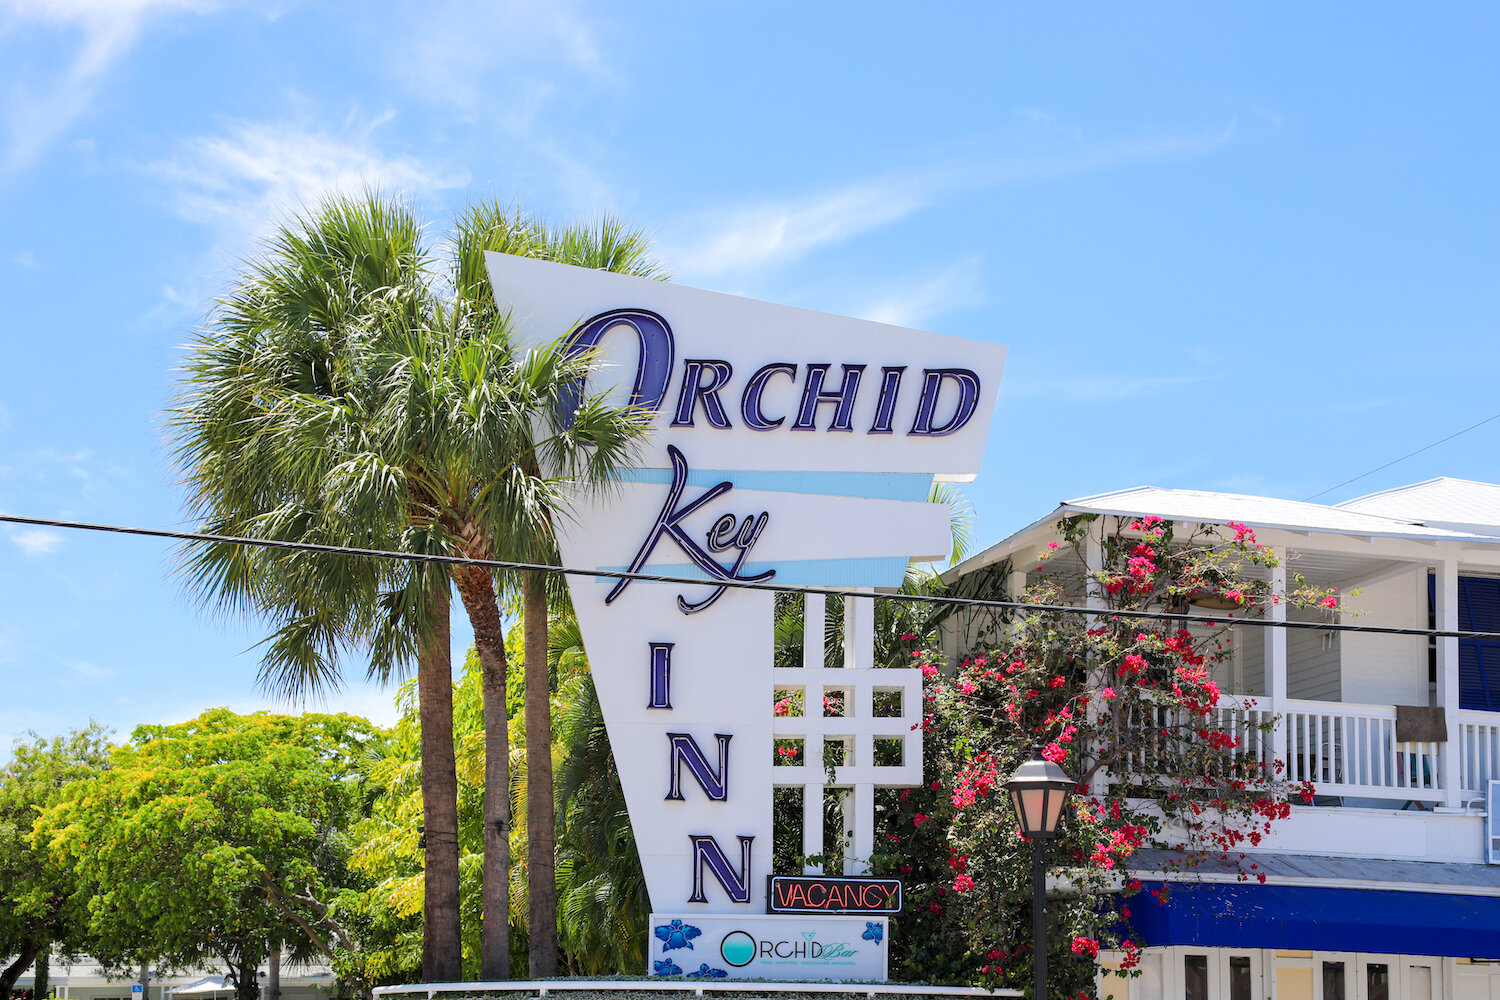 Location and Attractions — Orchid Key hq image